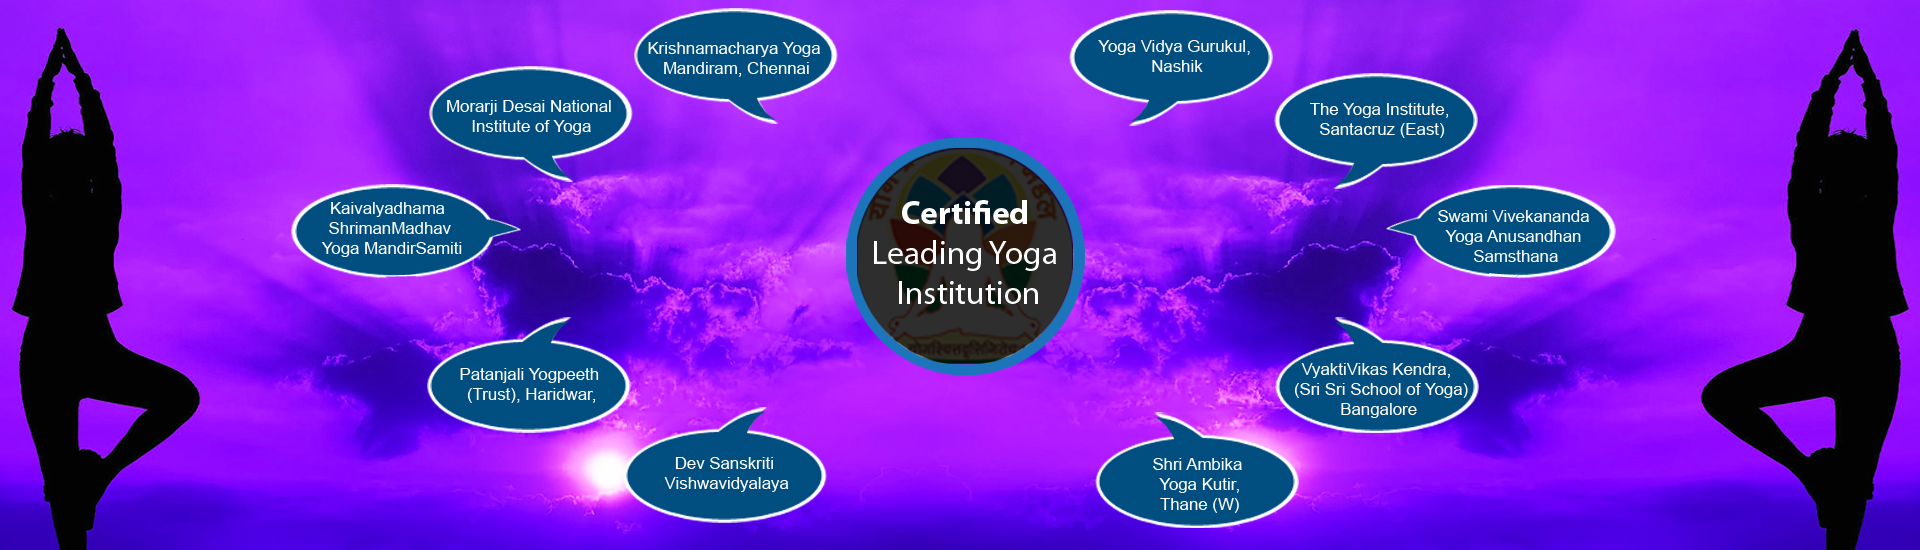 Certified Leading yoga institution image